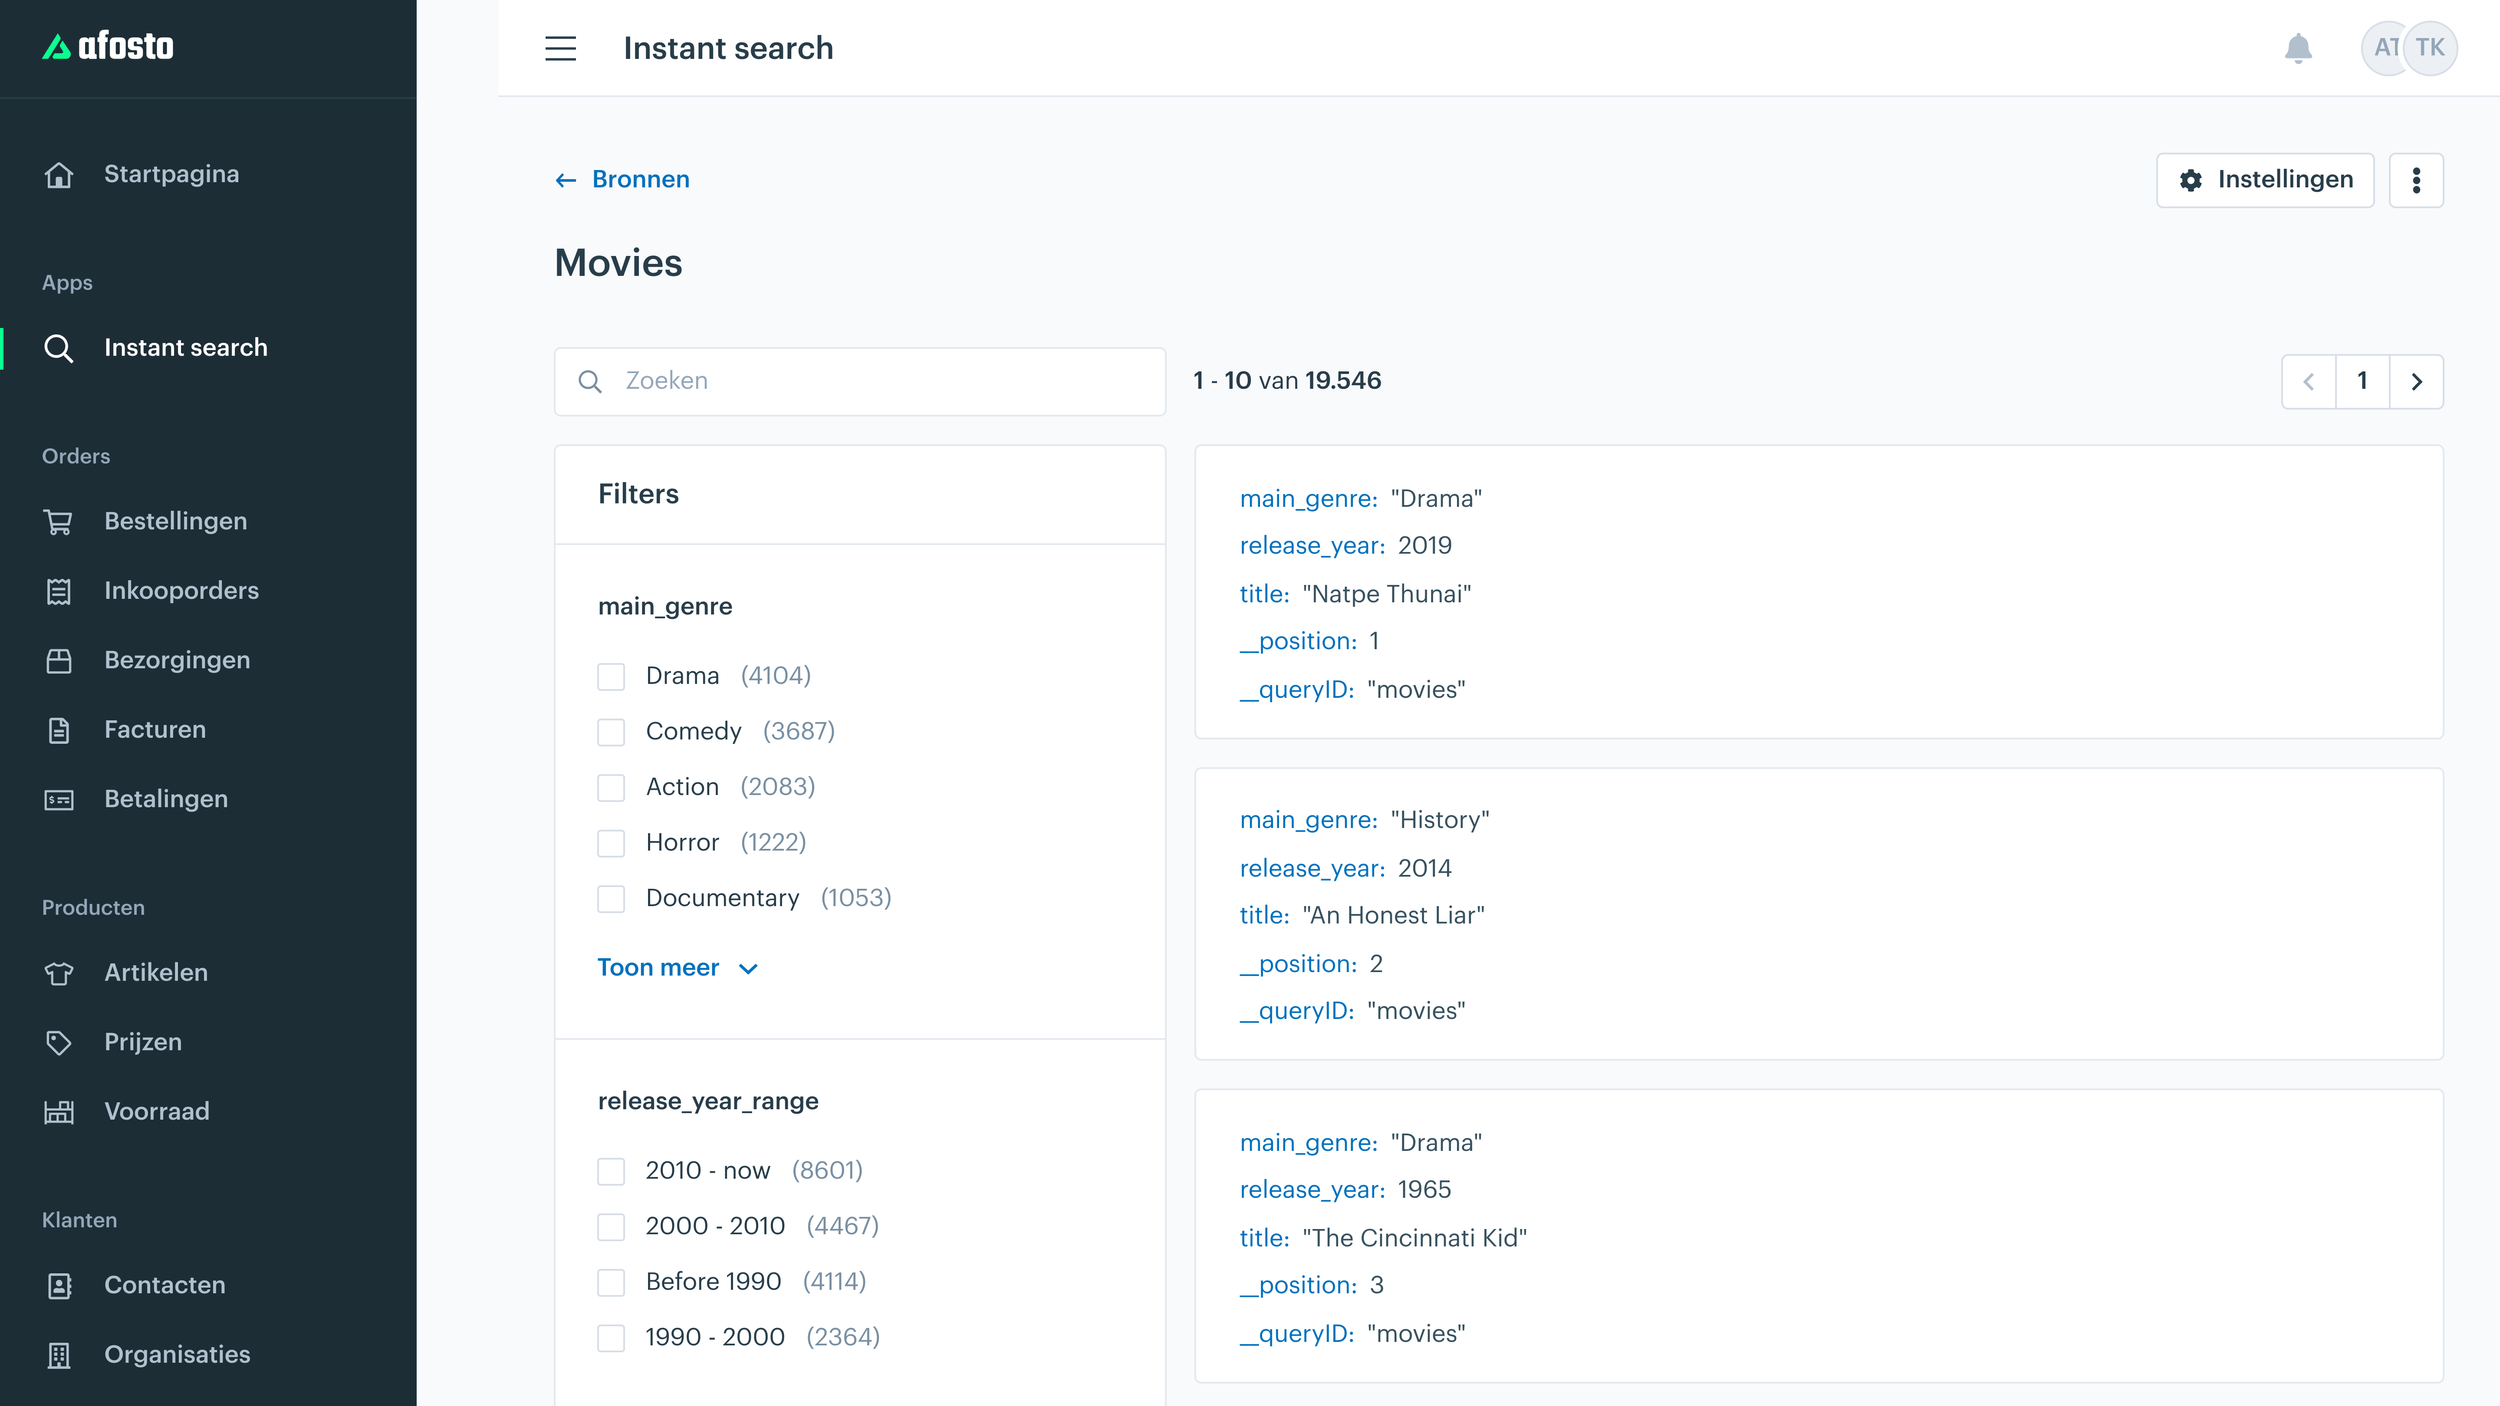 EN - instant search - search overview without visible attributes.png